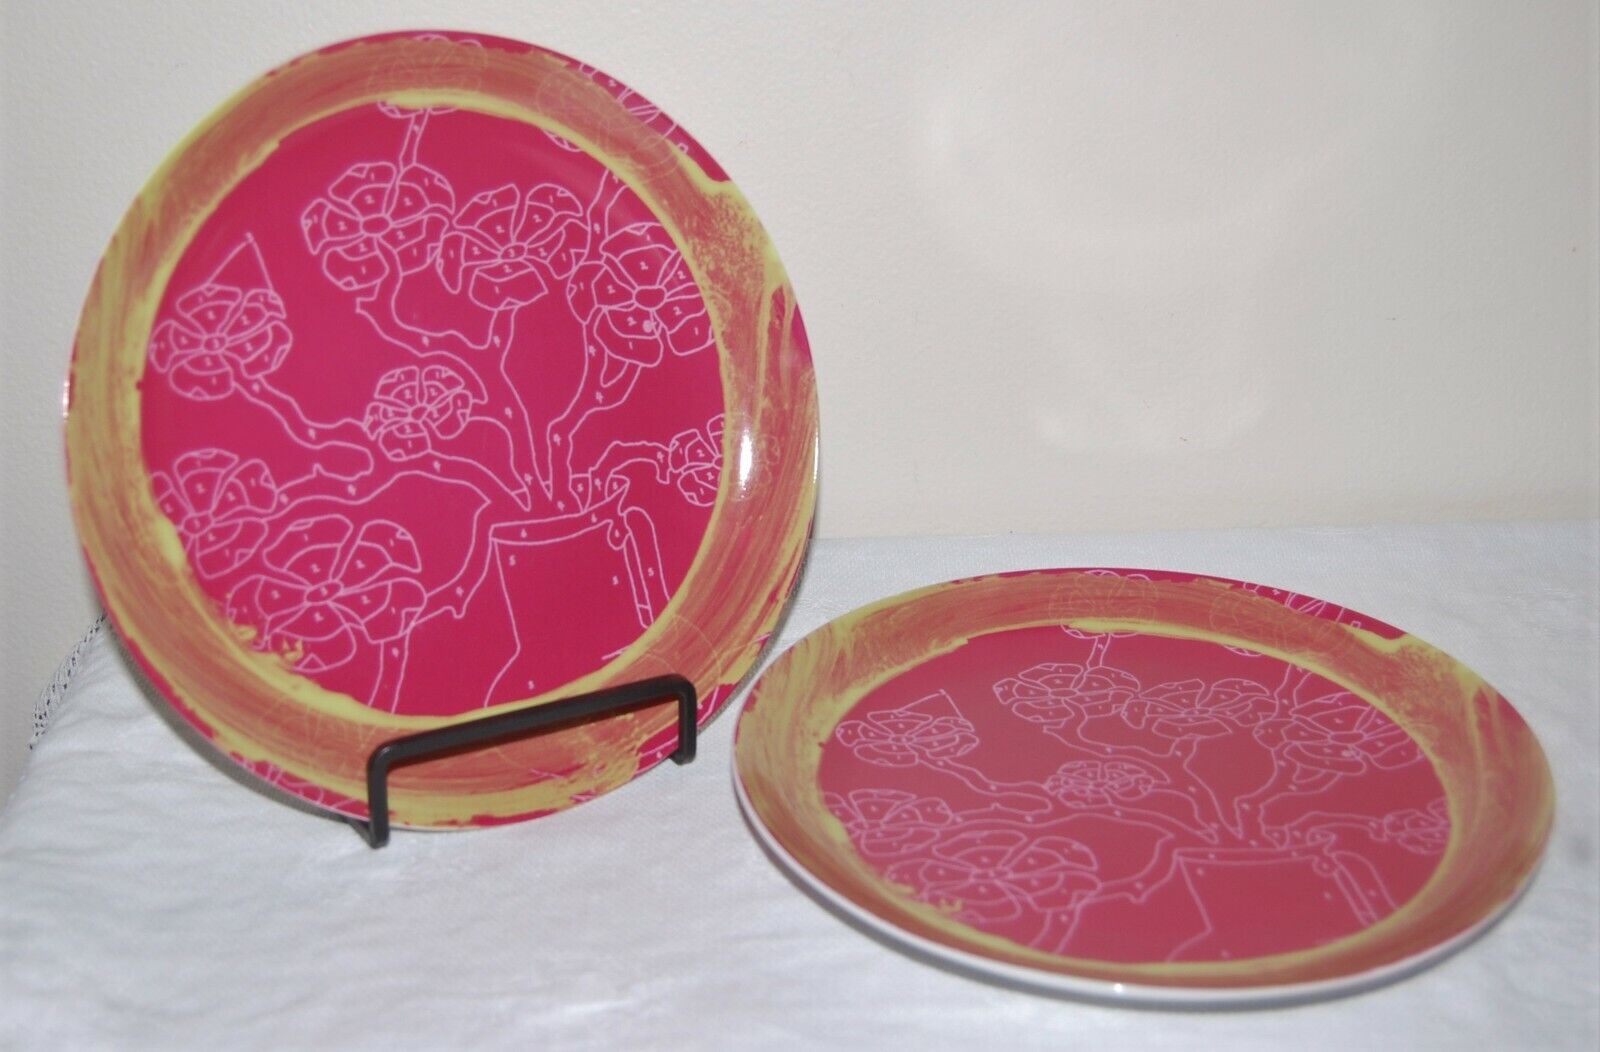 Set of 2 Trey Speegle 3 Reasons To Love You 8 inch Plates, #113 Complete Anthropologie